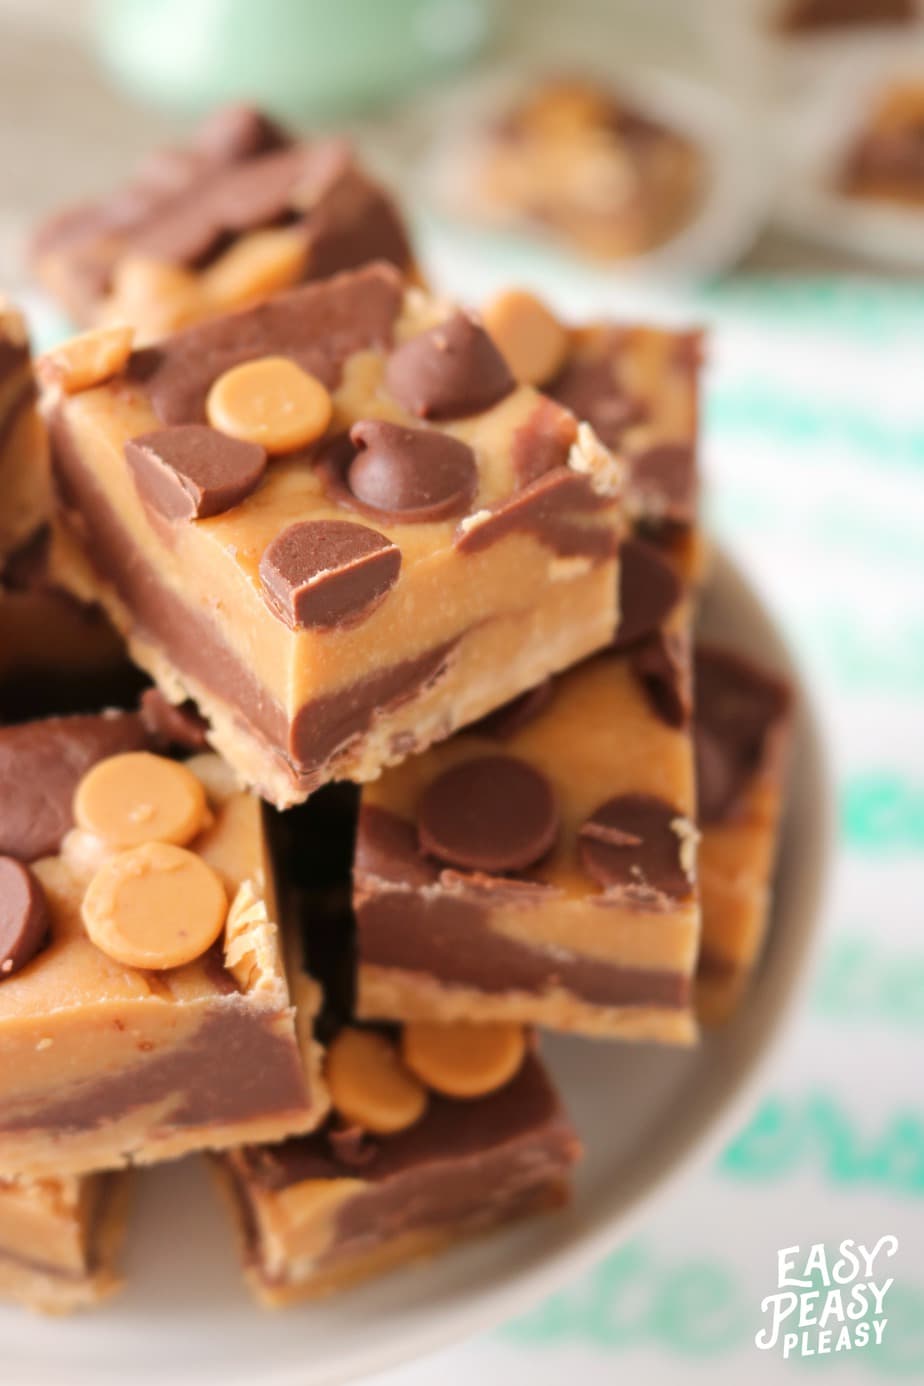 Satisfy your sweet tooth with this easy and decadent 3 ingredient chocolate peanut butter fudge recipe. Perfect for for homemade gifts.